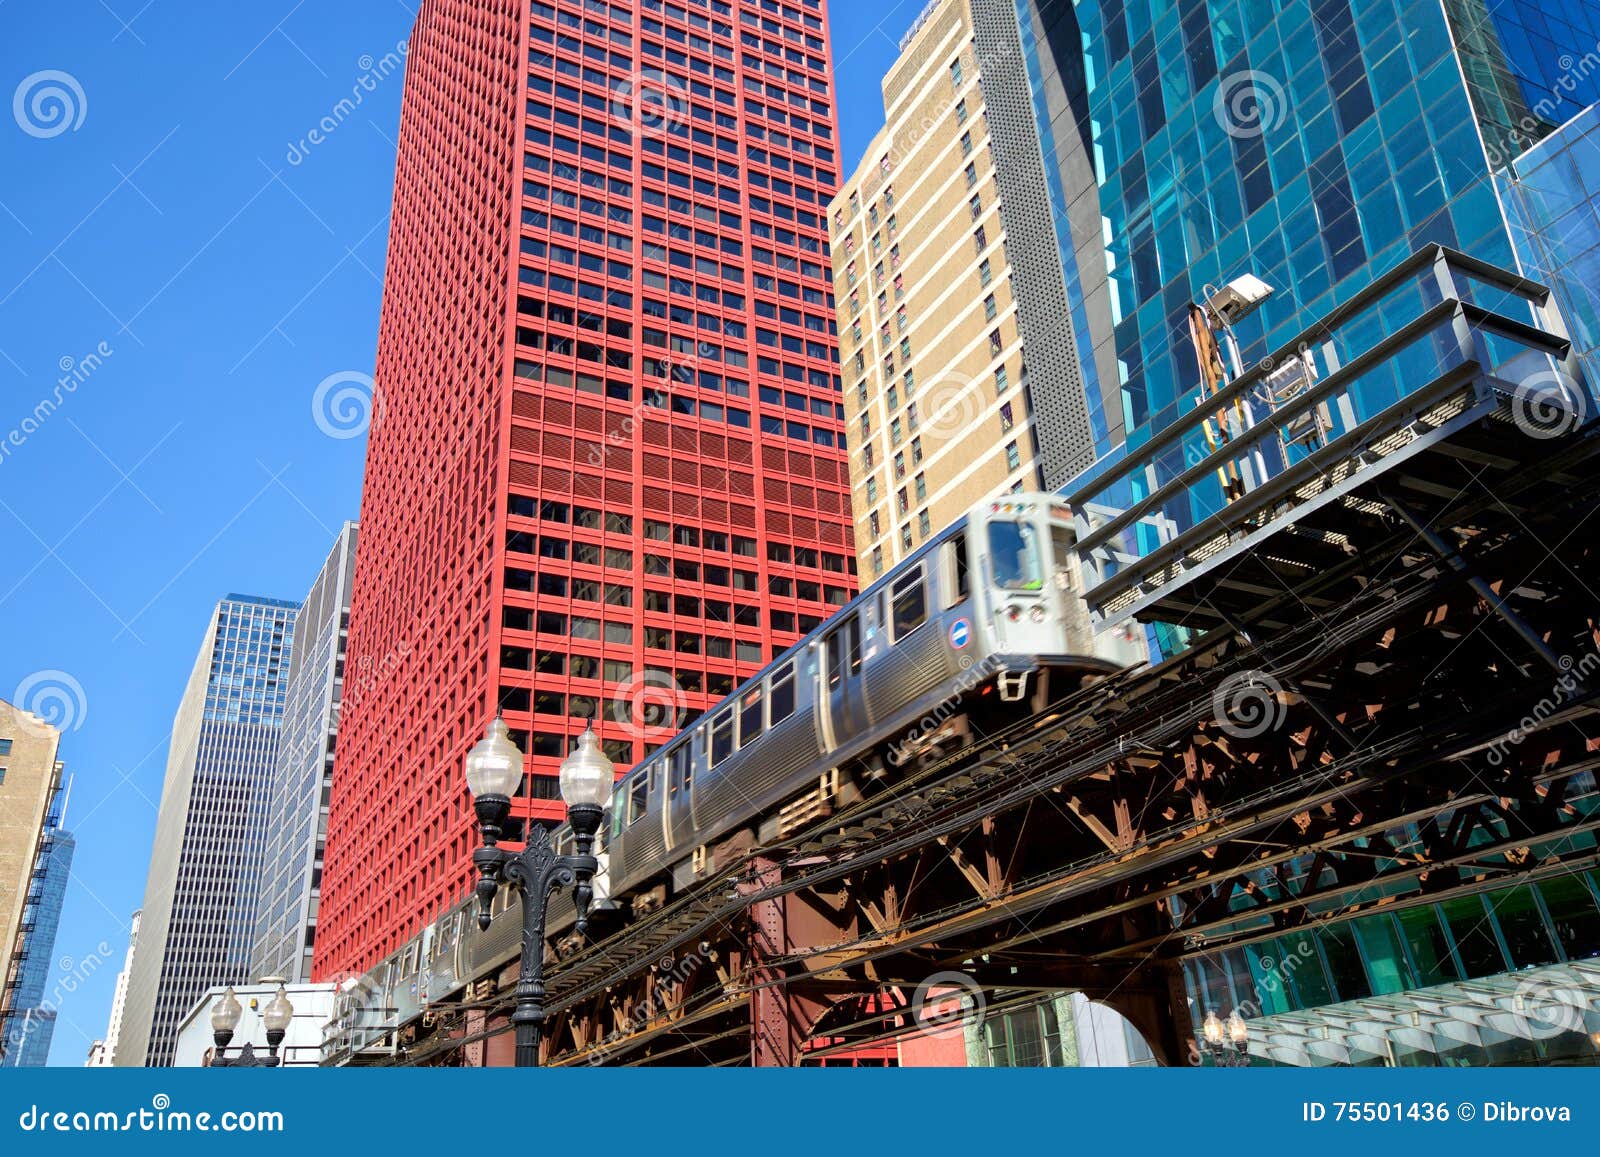 elevated train in chicago